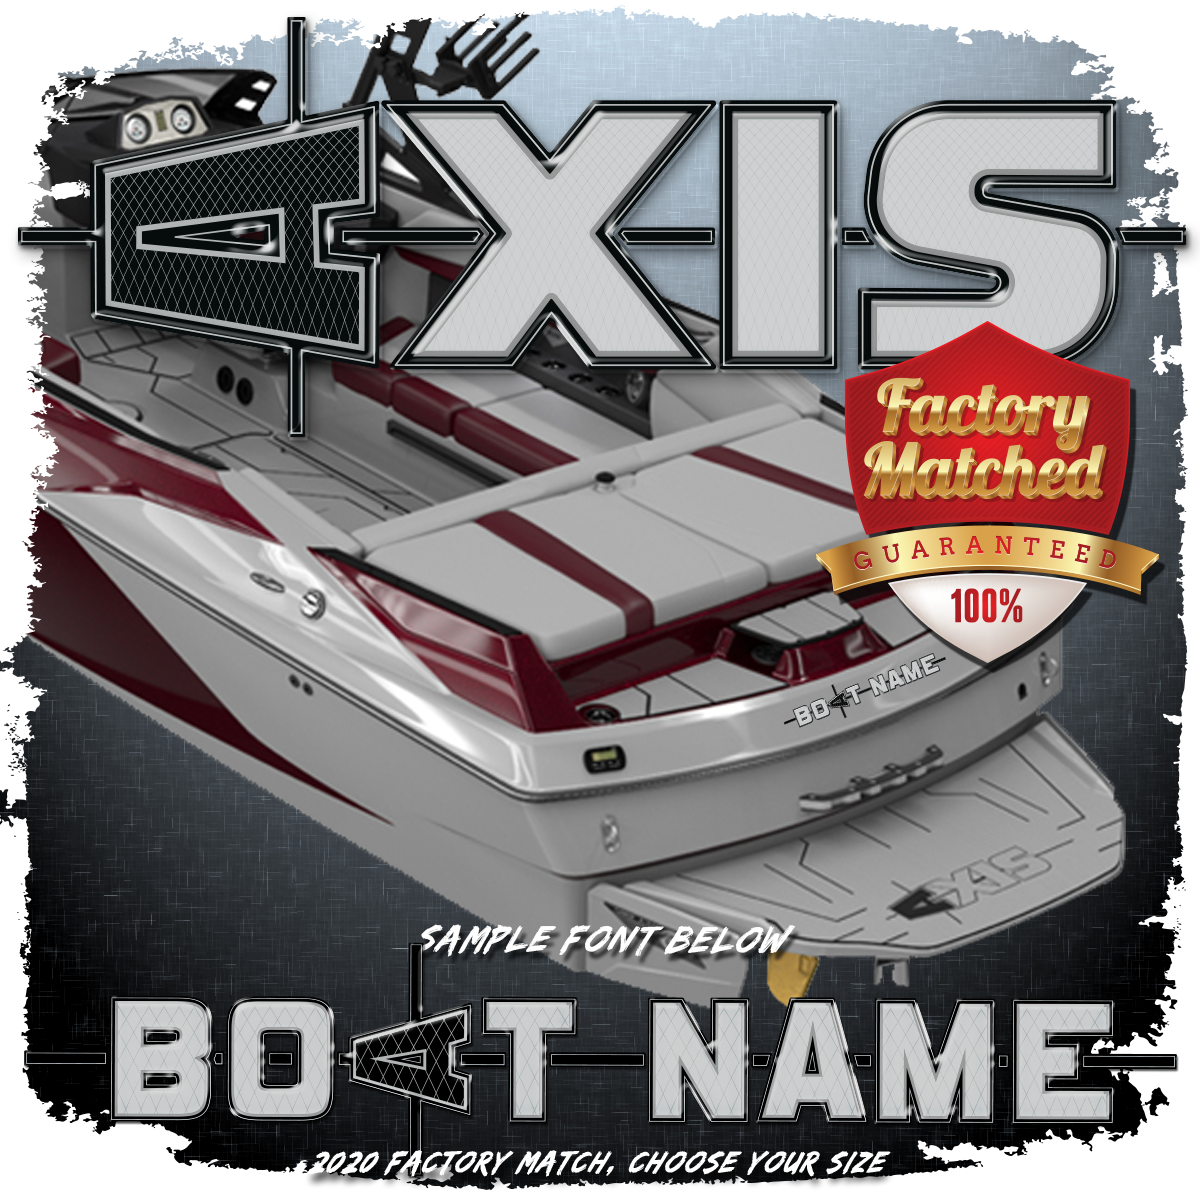 Domed Boat Name in the Axis 2020 - current Factory Match Font